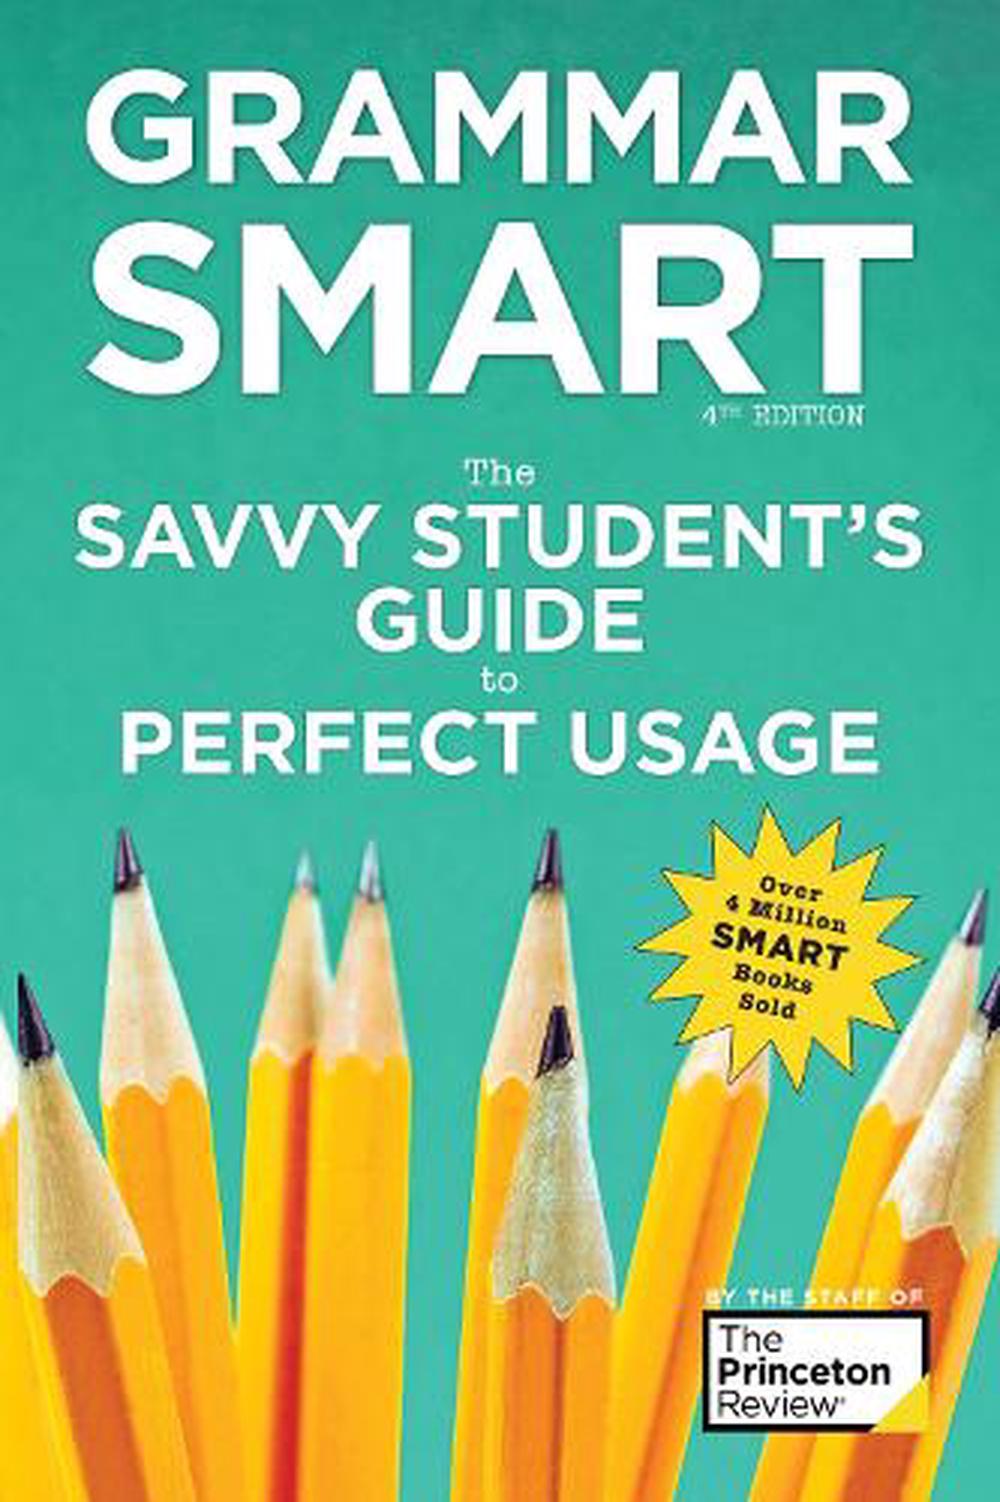 Grammar Smart The Savvy Student's Guide to Perfect Usage by Princeton Review (E 9781524710569